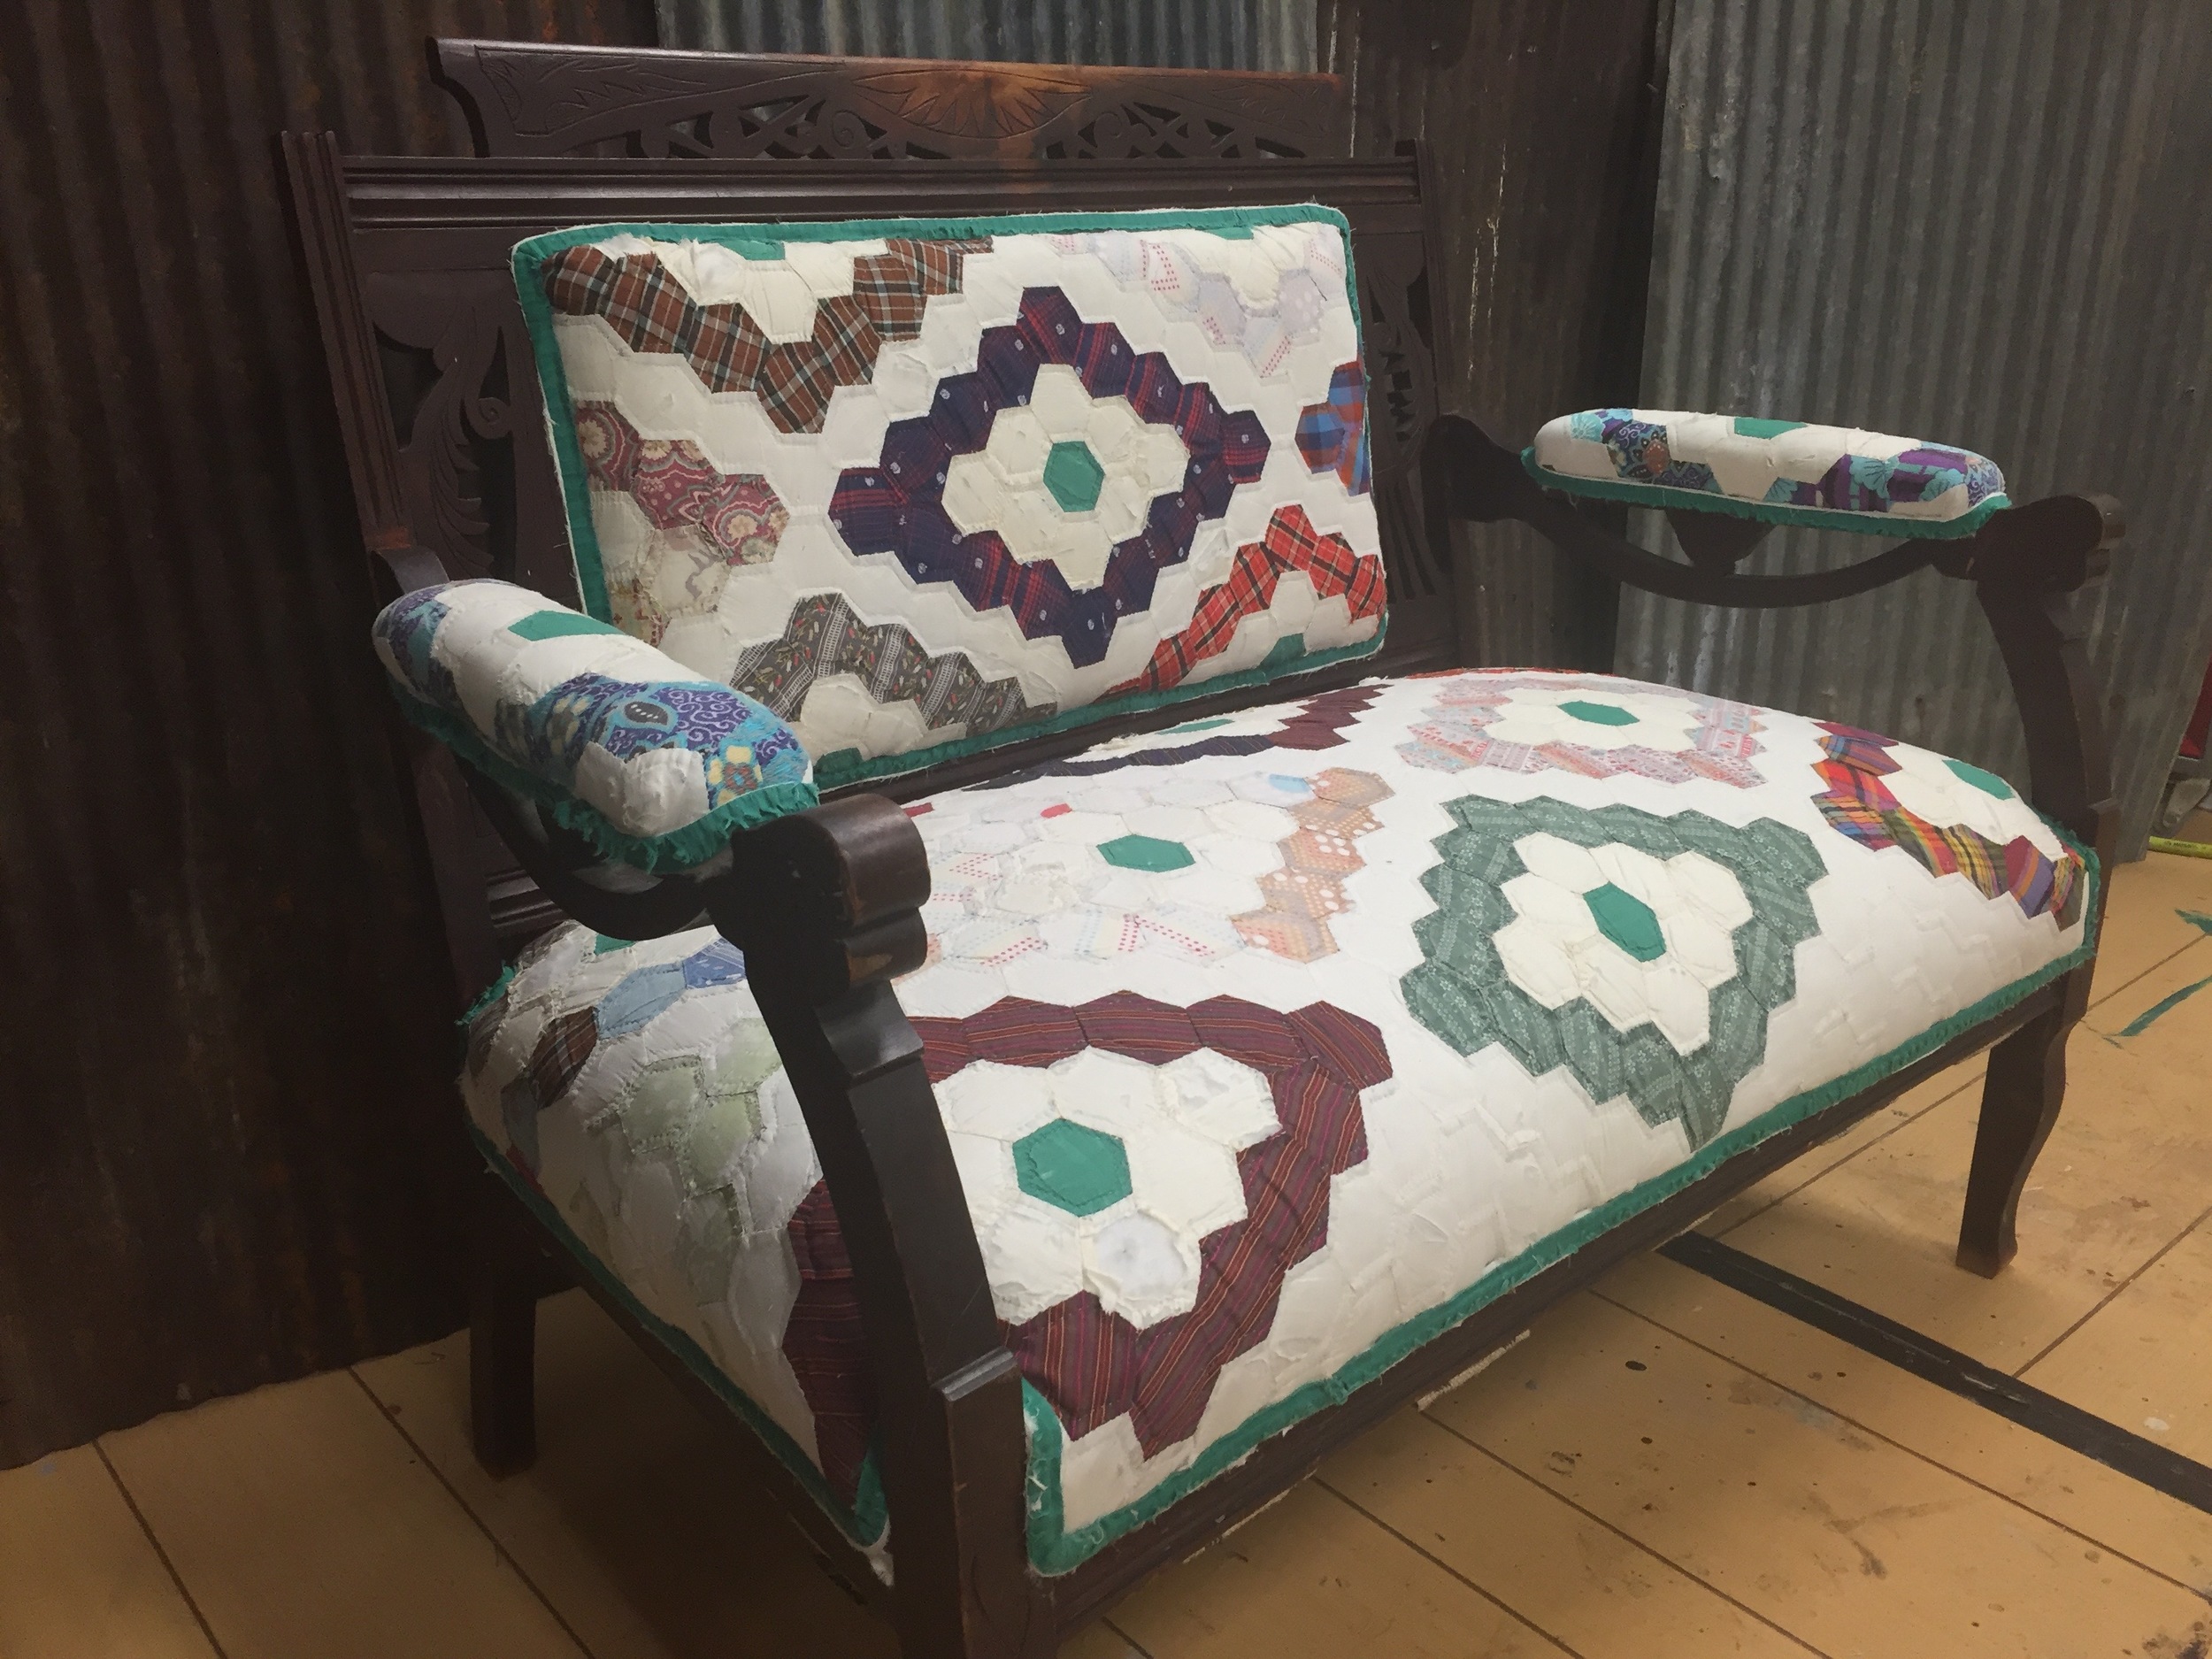    Laura Locke of Turning Leaf Crafts repurposed a vintage quilt into a unique covering for an antique settee. The quilt donated by musician Sheryl Crow will be auction off at the June City Farmhouse Pop-up Fair. The proceeds from the auction will be